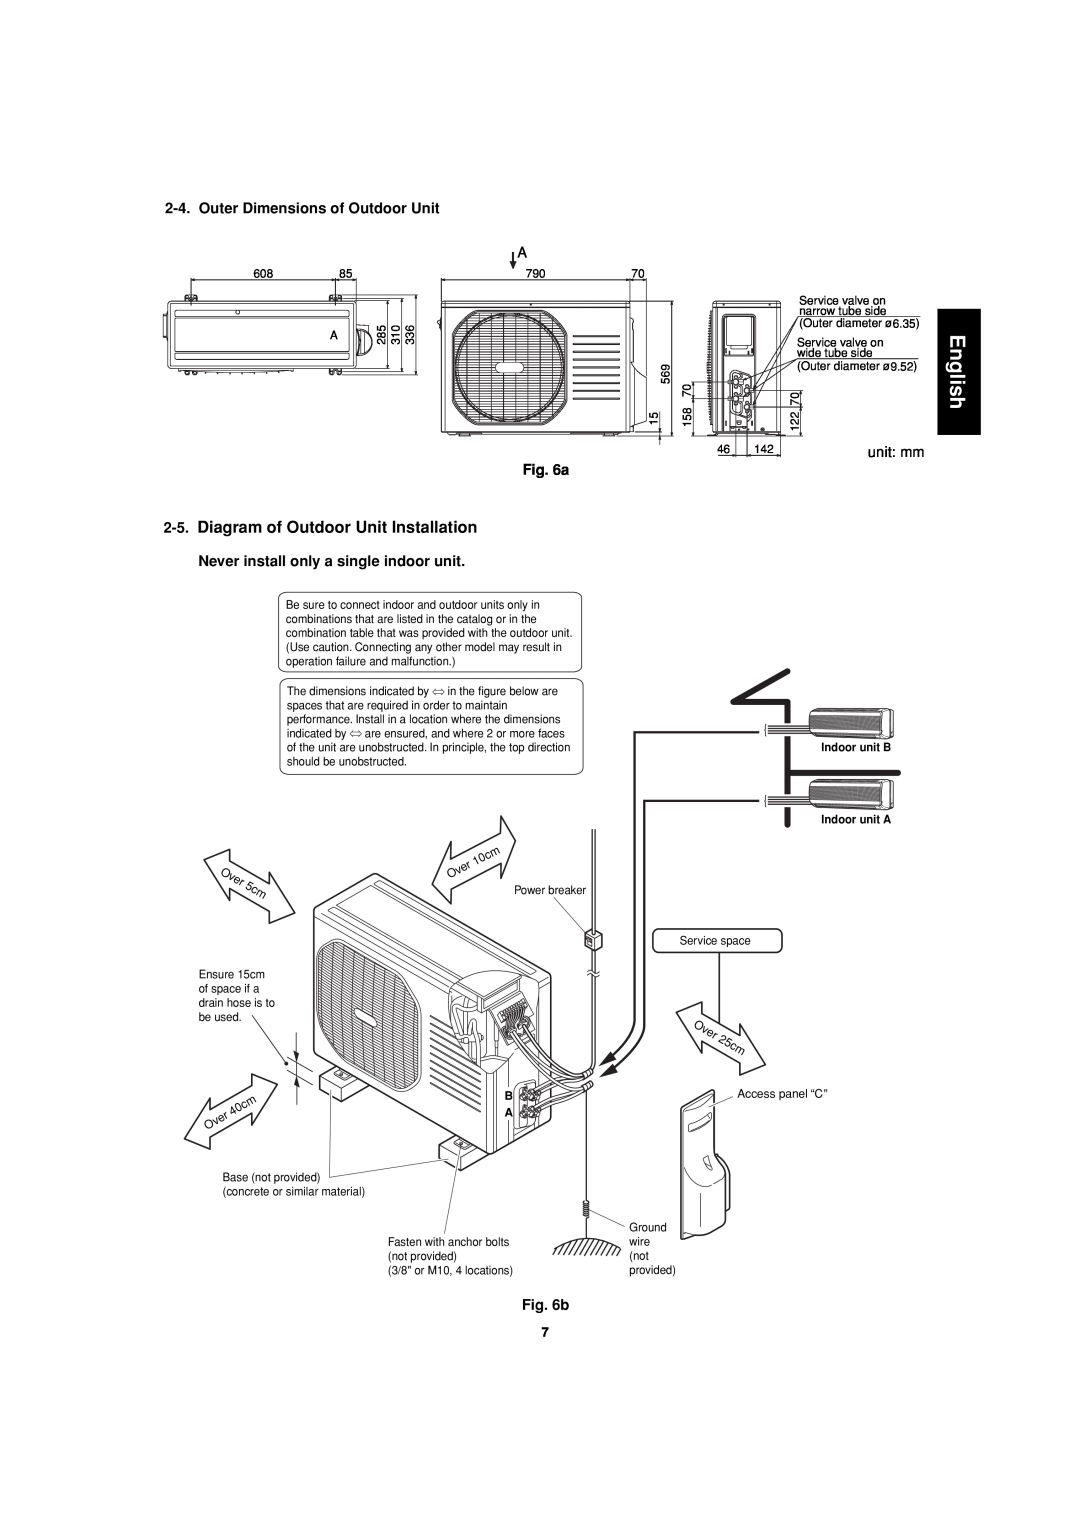 Sanyo SAP-CMRV1426EH-F, SAP-CMRV1926EH English, Diagram of Outdoor Unit Installation, Outer Dimensions of Outdoor Unit, b 